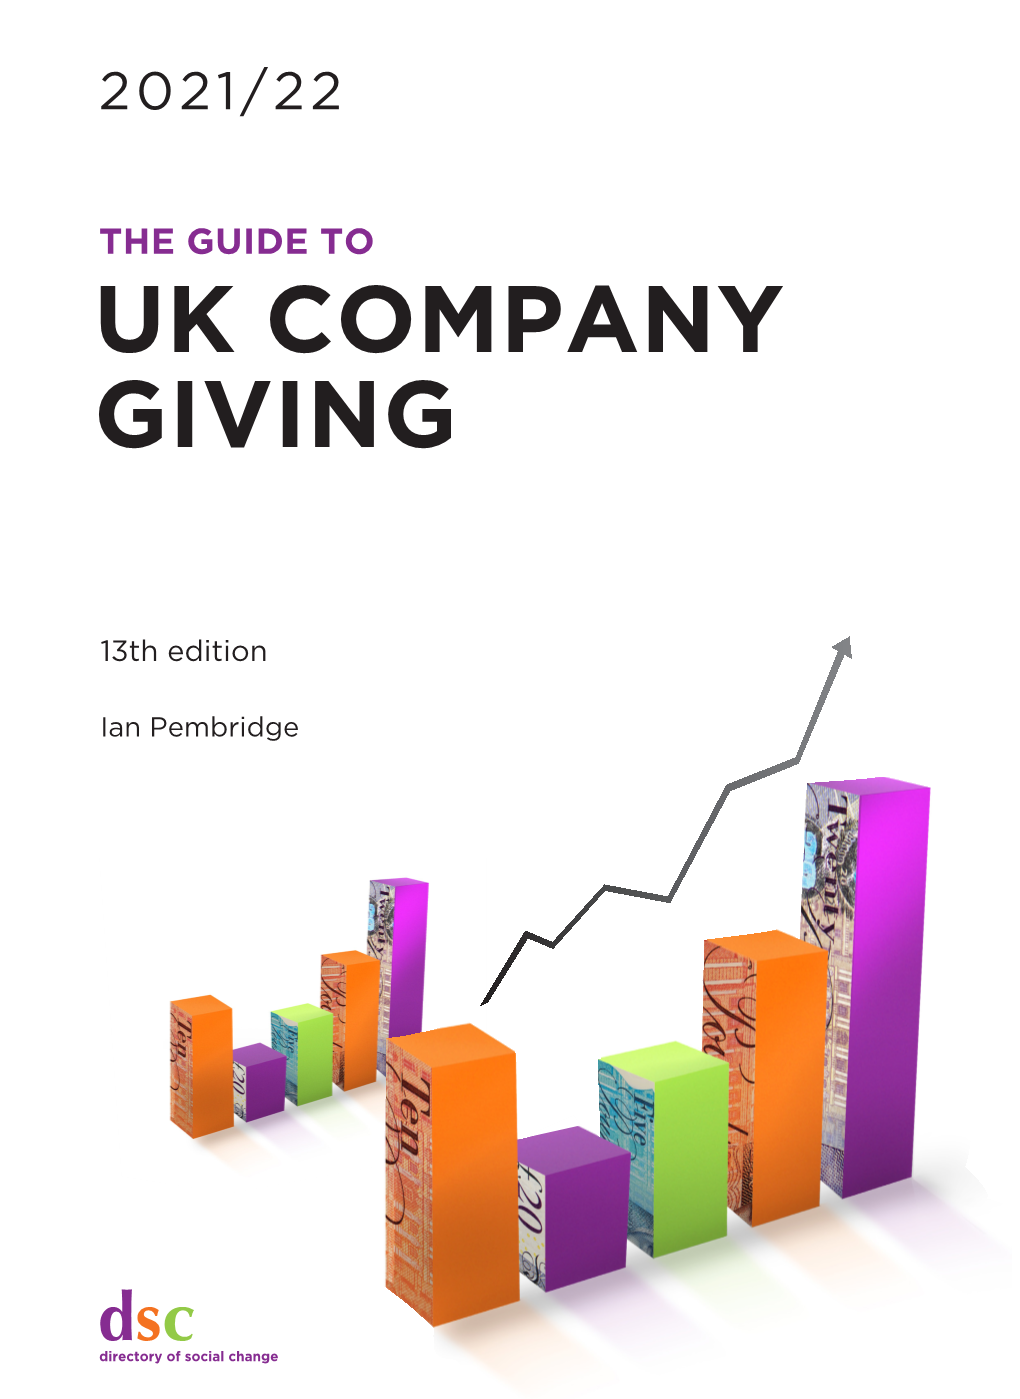 The Guide to UK Company Giving 2021–22